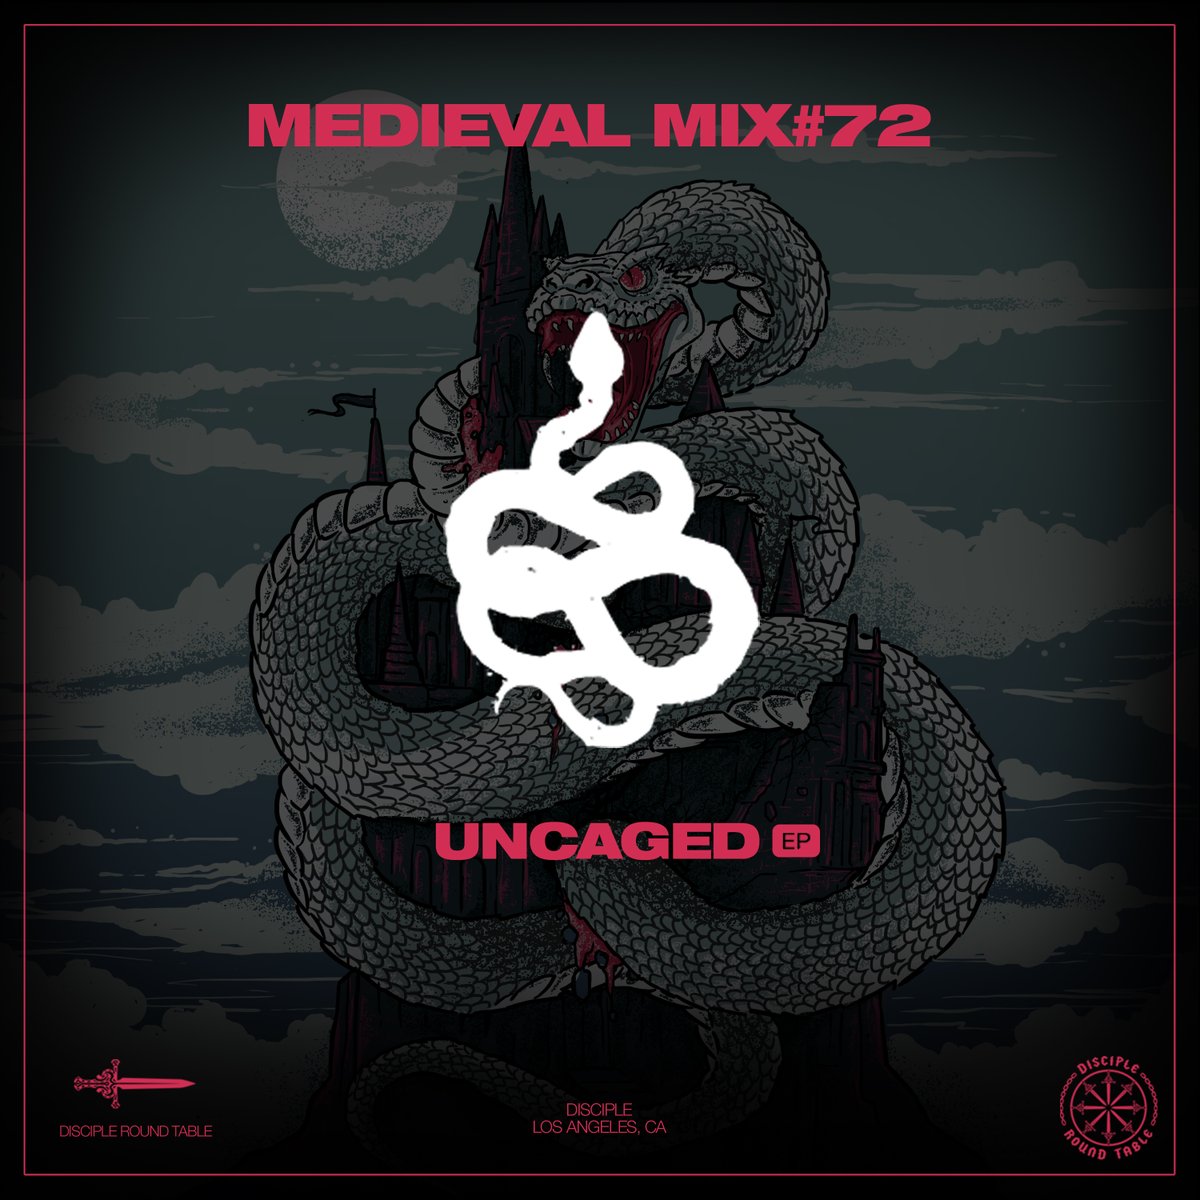 Just dropped my Medieval mix to celebrate the Uncaged EP dropping tomorrow w/ @DiscipleRT! Nearly all IDs from myself and the homies🐍⚔ peep it here: drt.fanlink.to/medievalmixser…